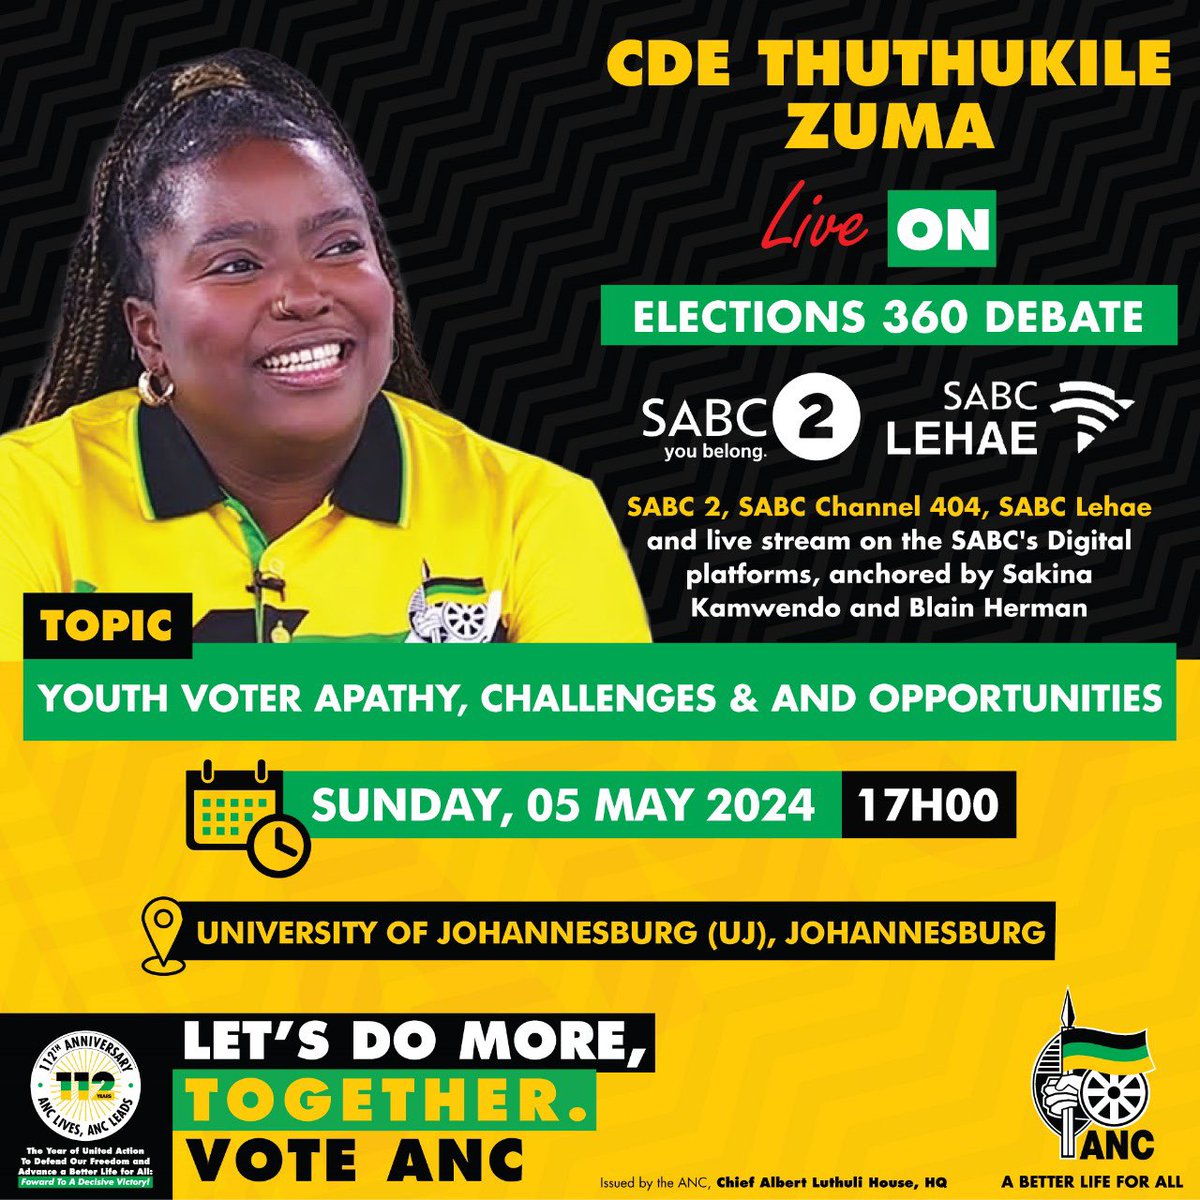 Catch Cde Thuthukile Zuma, live on Elections 360 Debate on SABC 2 today at 17h00 as she engages on youth voter apathy, challenges, and opportunities. #VoteANC2024 #LetsDoMoreTogether